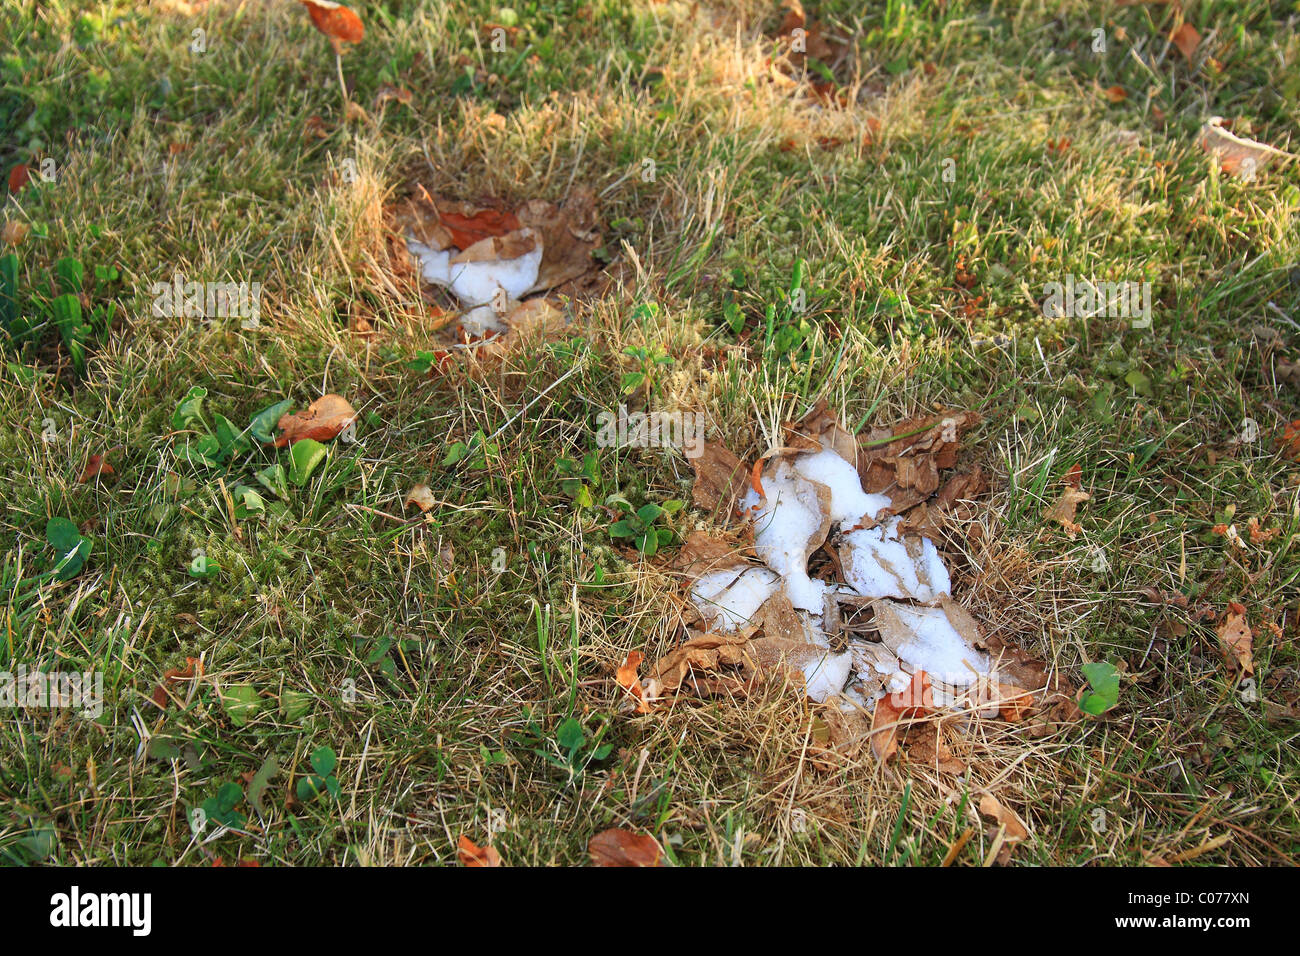 'Weed' has been sprinkled with salt to remove it to keep the lawn clean Stock Photo